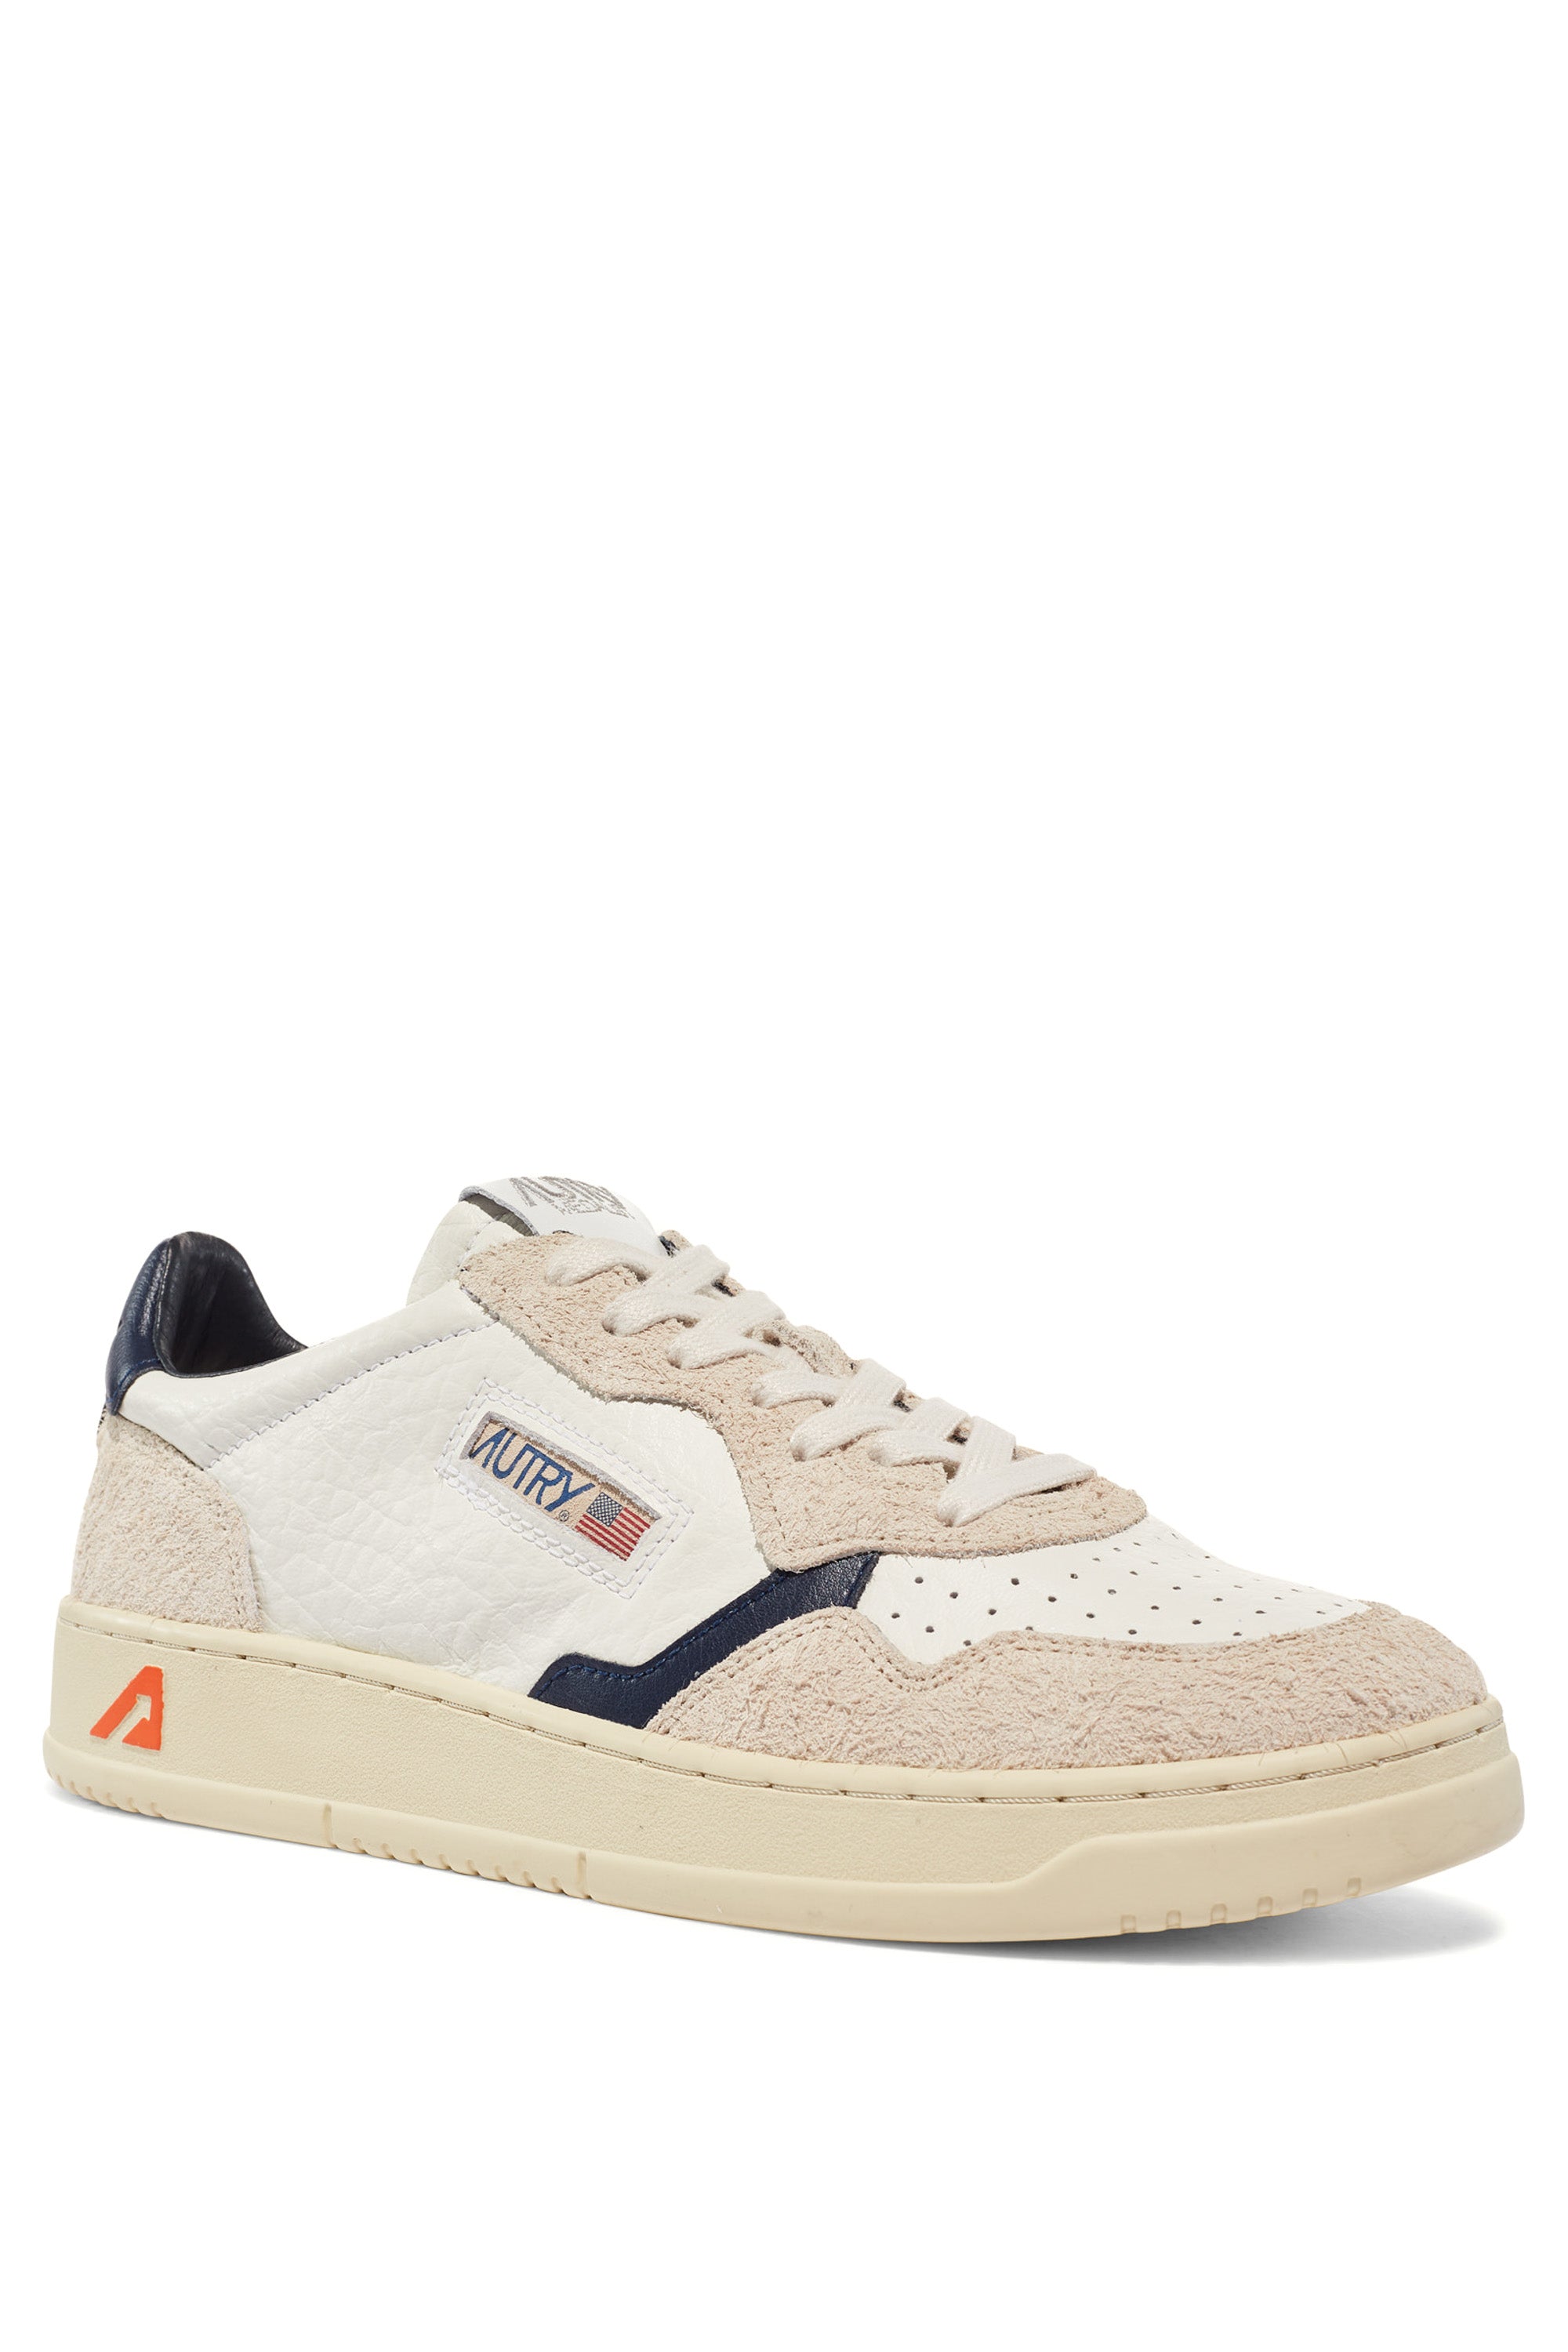 Medalist women's sneakers in two-tone leather and hair-effect suede